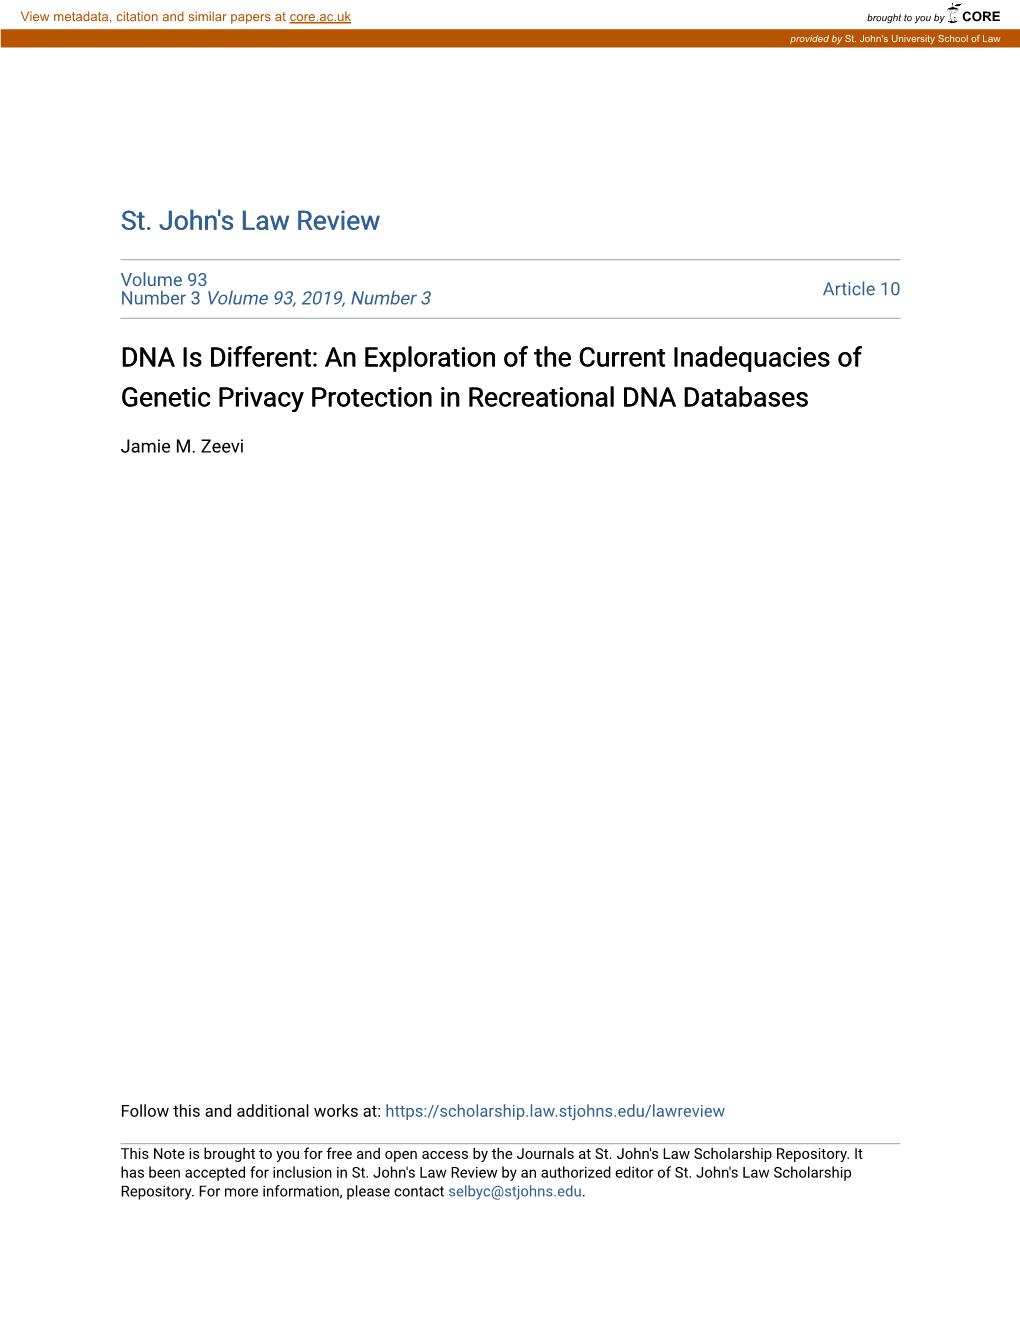 DNA Is Different: an Exploration of the Current Inadequacies of Genetic Privacy Protection in Recreational DNA Databases